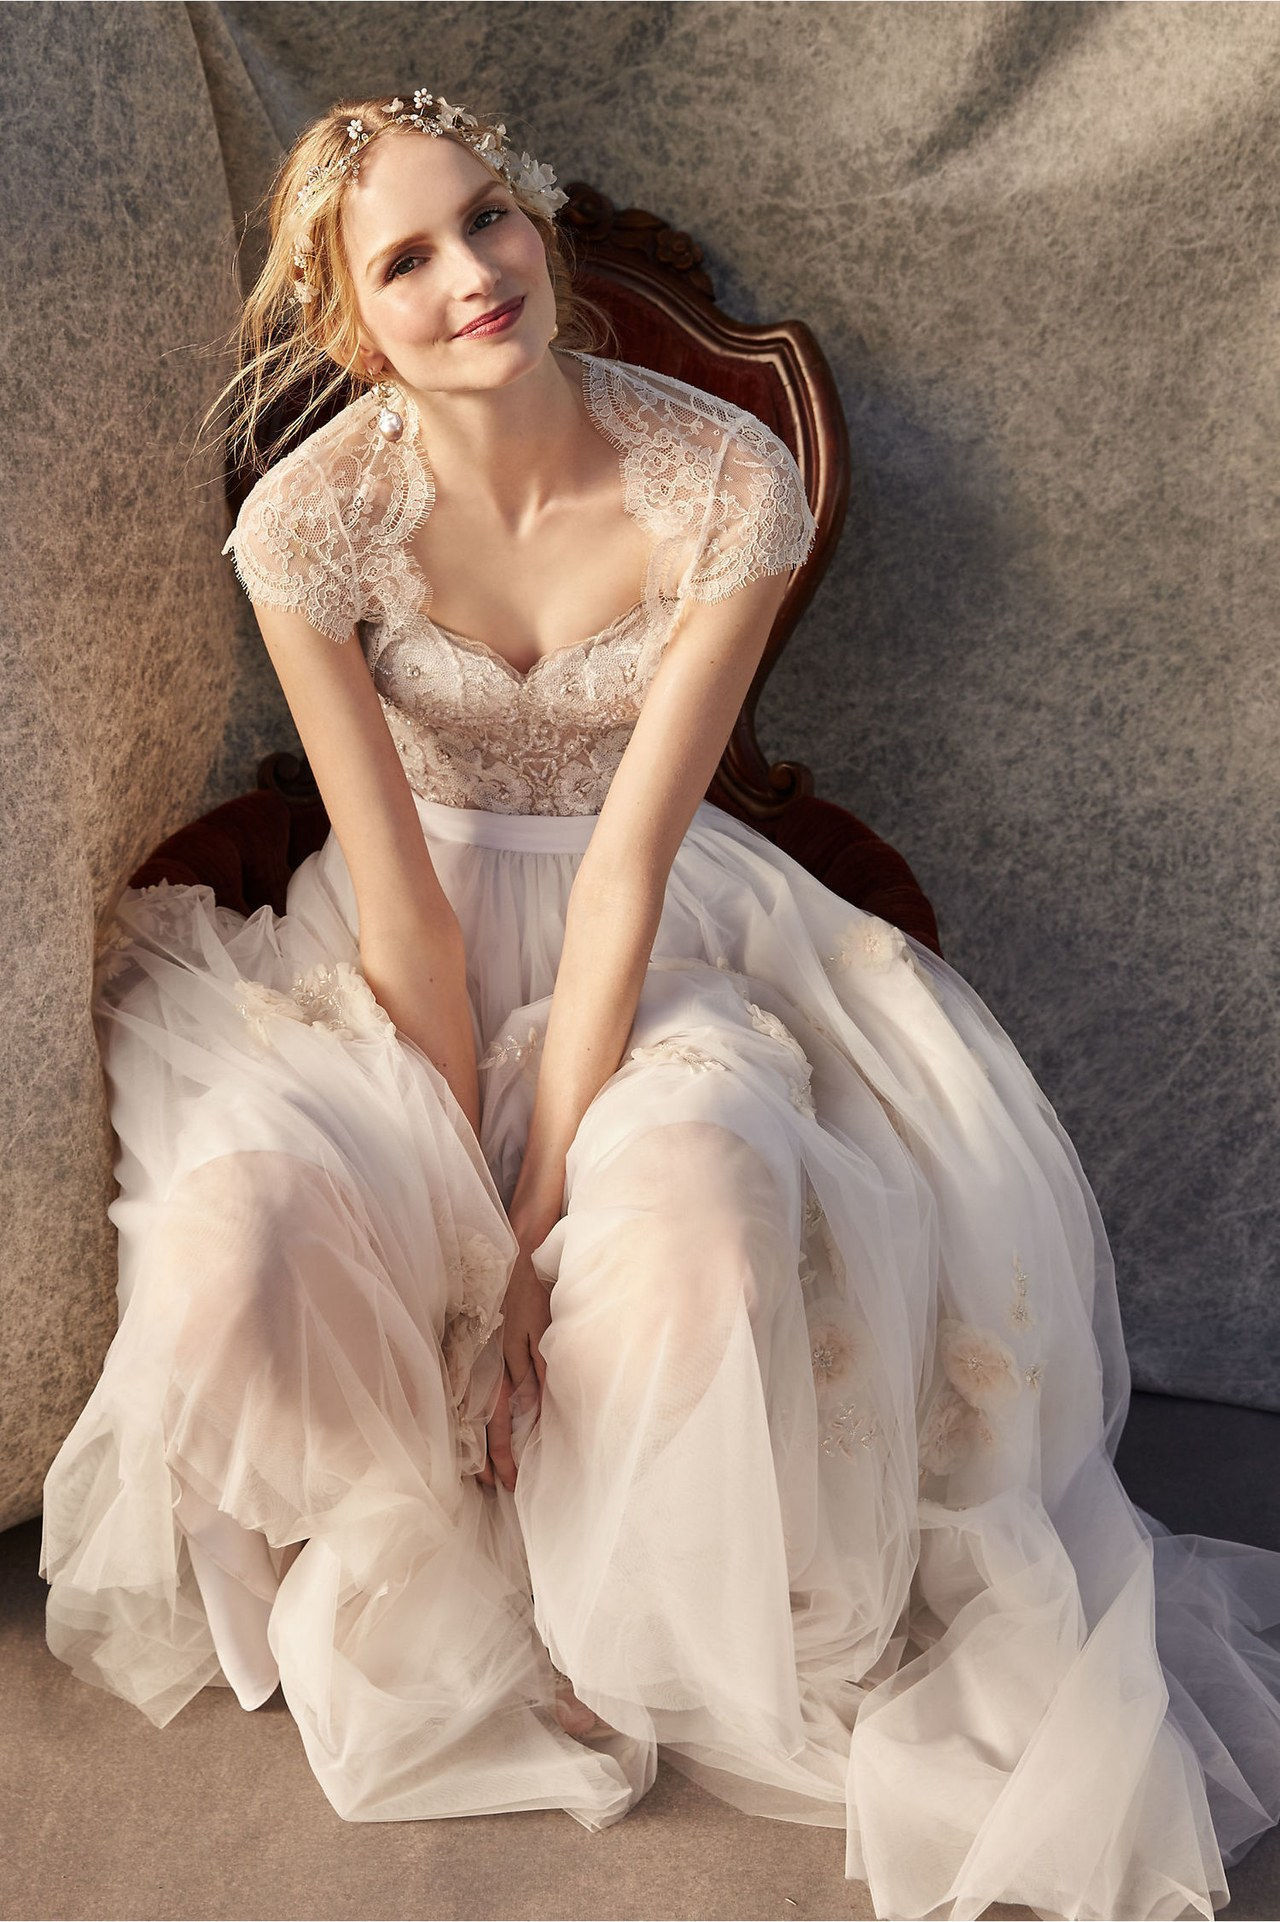 4 2 in 1 wedding dresses wedding gowns mix and match wedding dresses bhldn 0430 courtesy